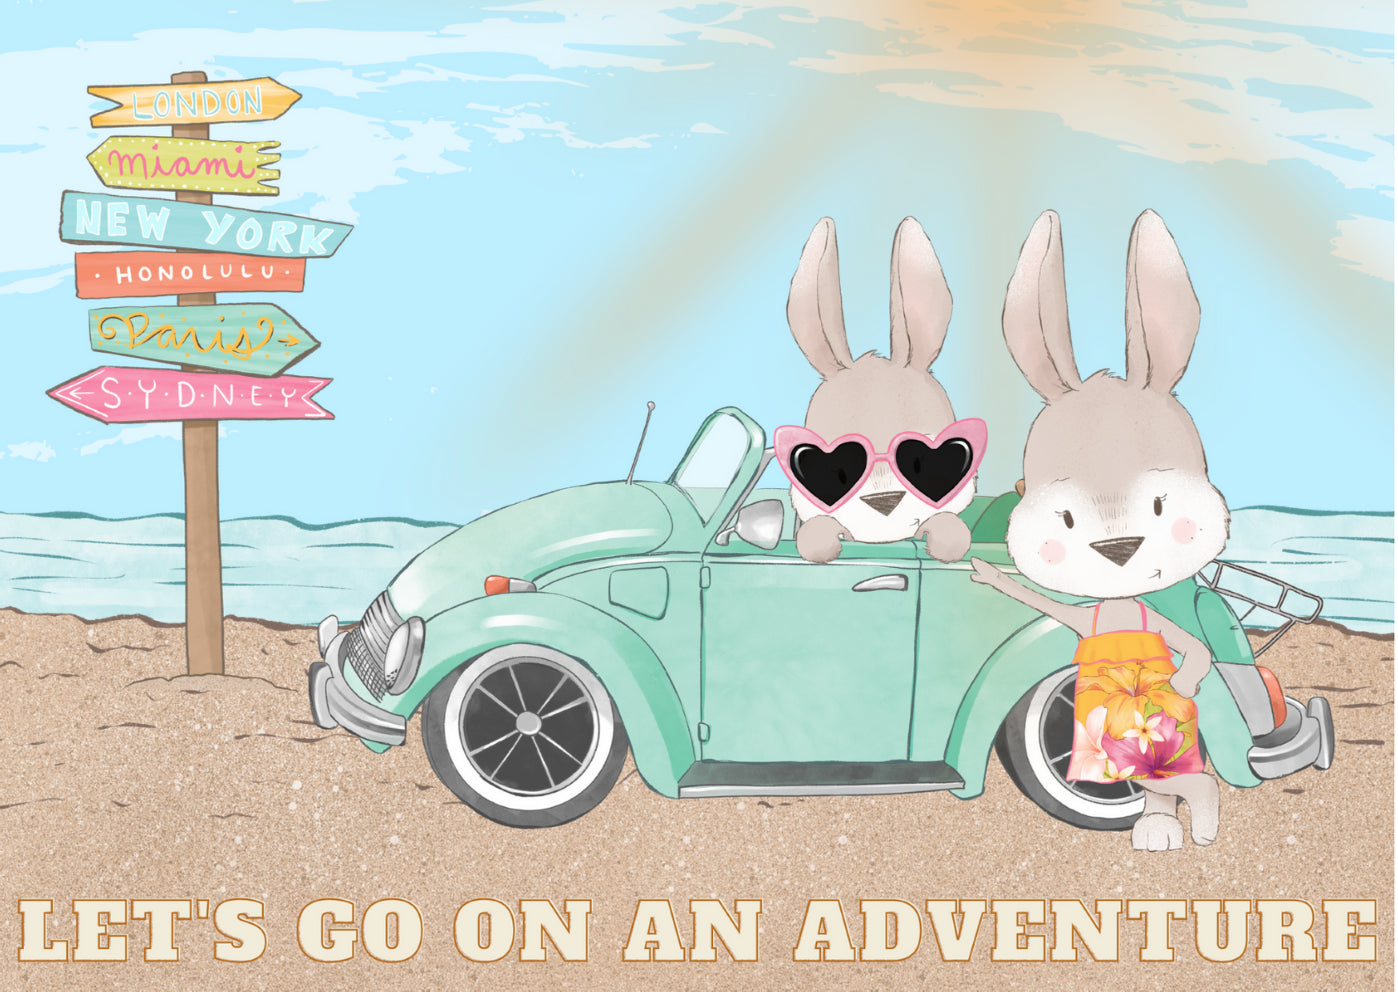 Lets go on an adventure| Zomerdieren collectie Fripperies